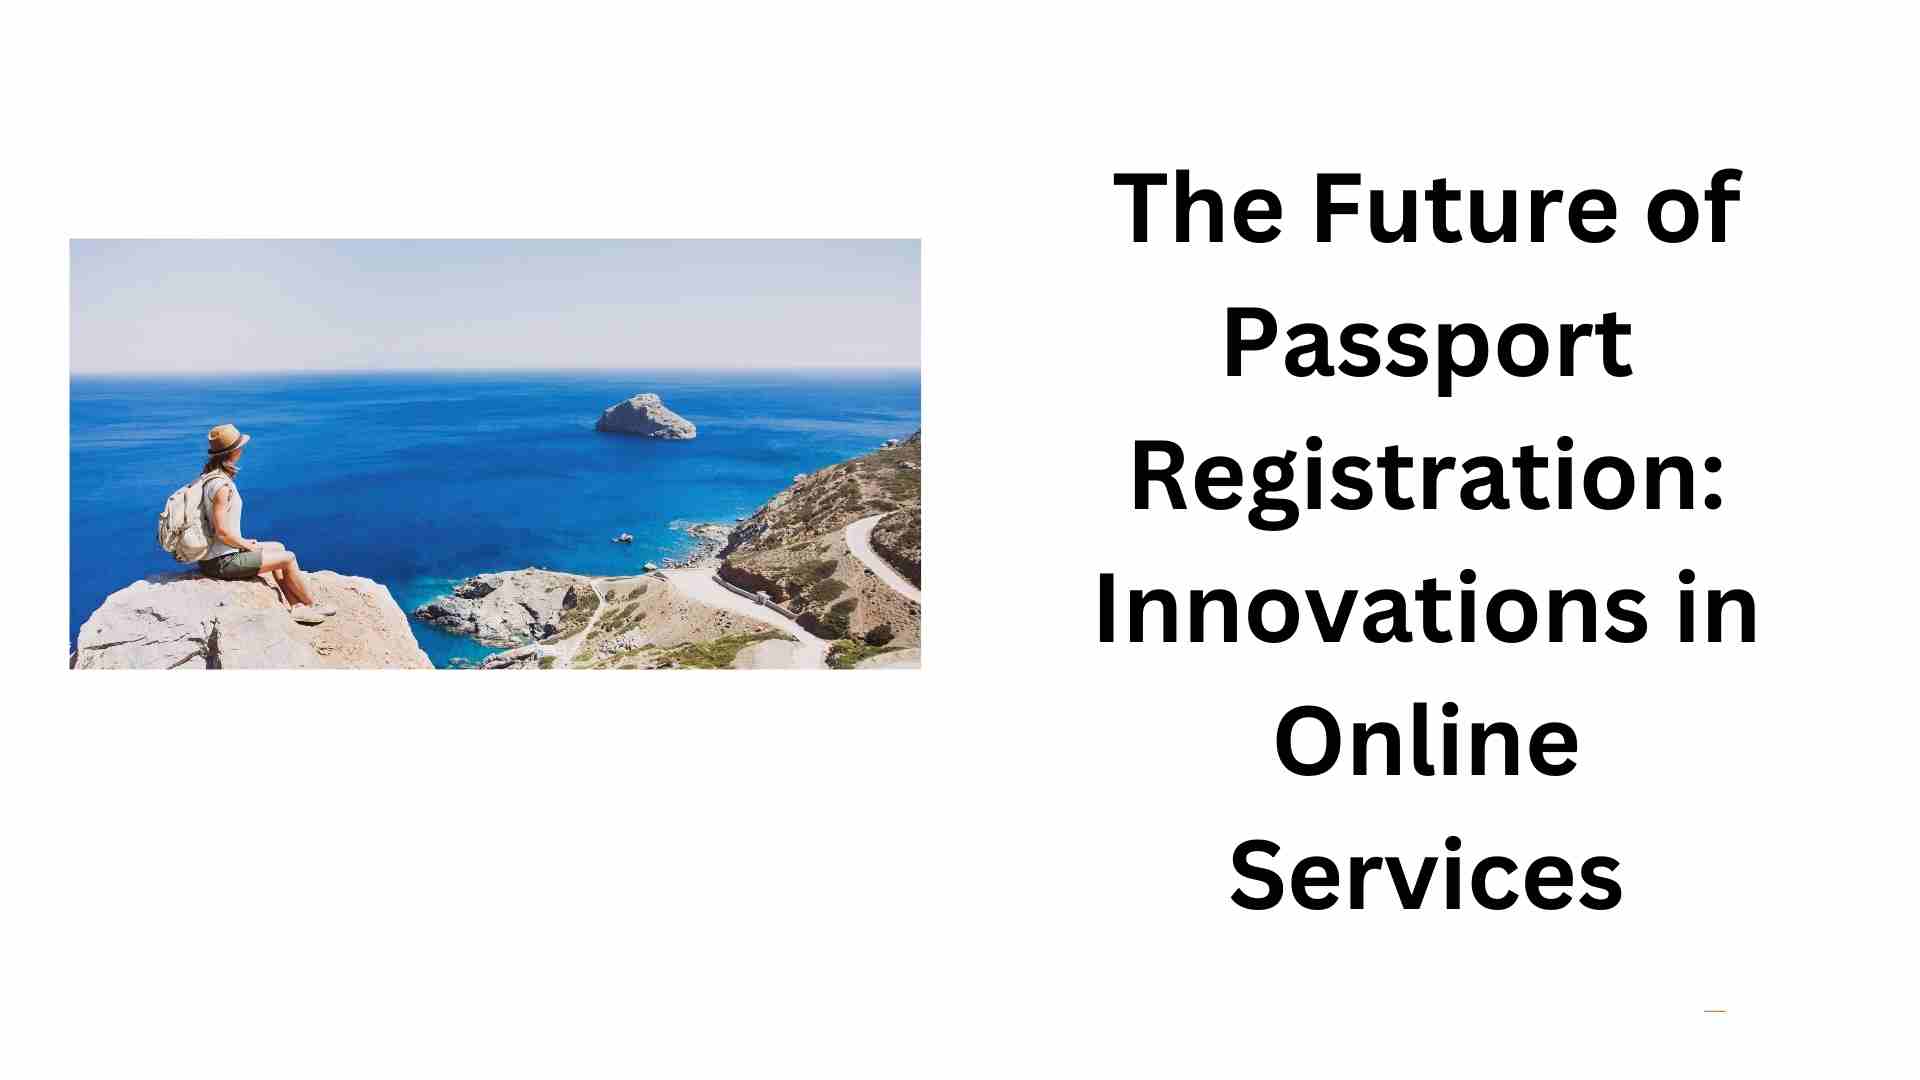 The Future of Passport Registration Innovations in Online Services